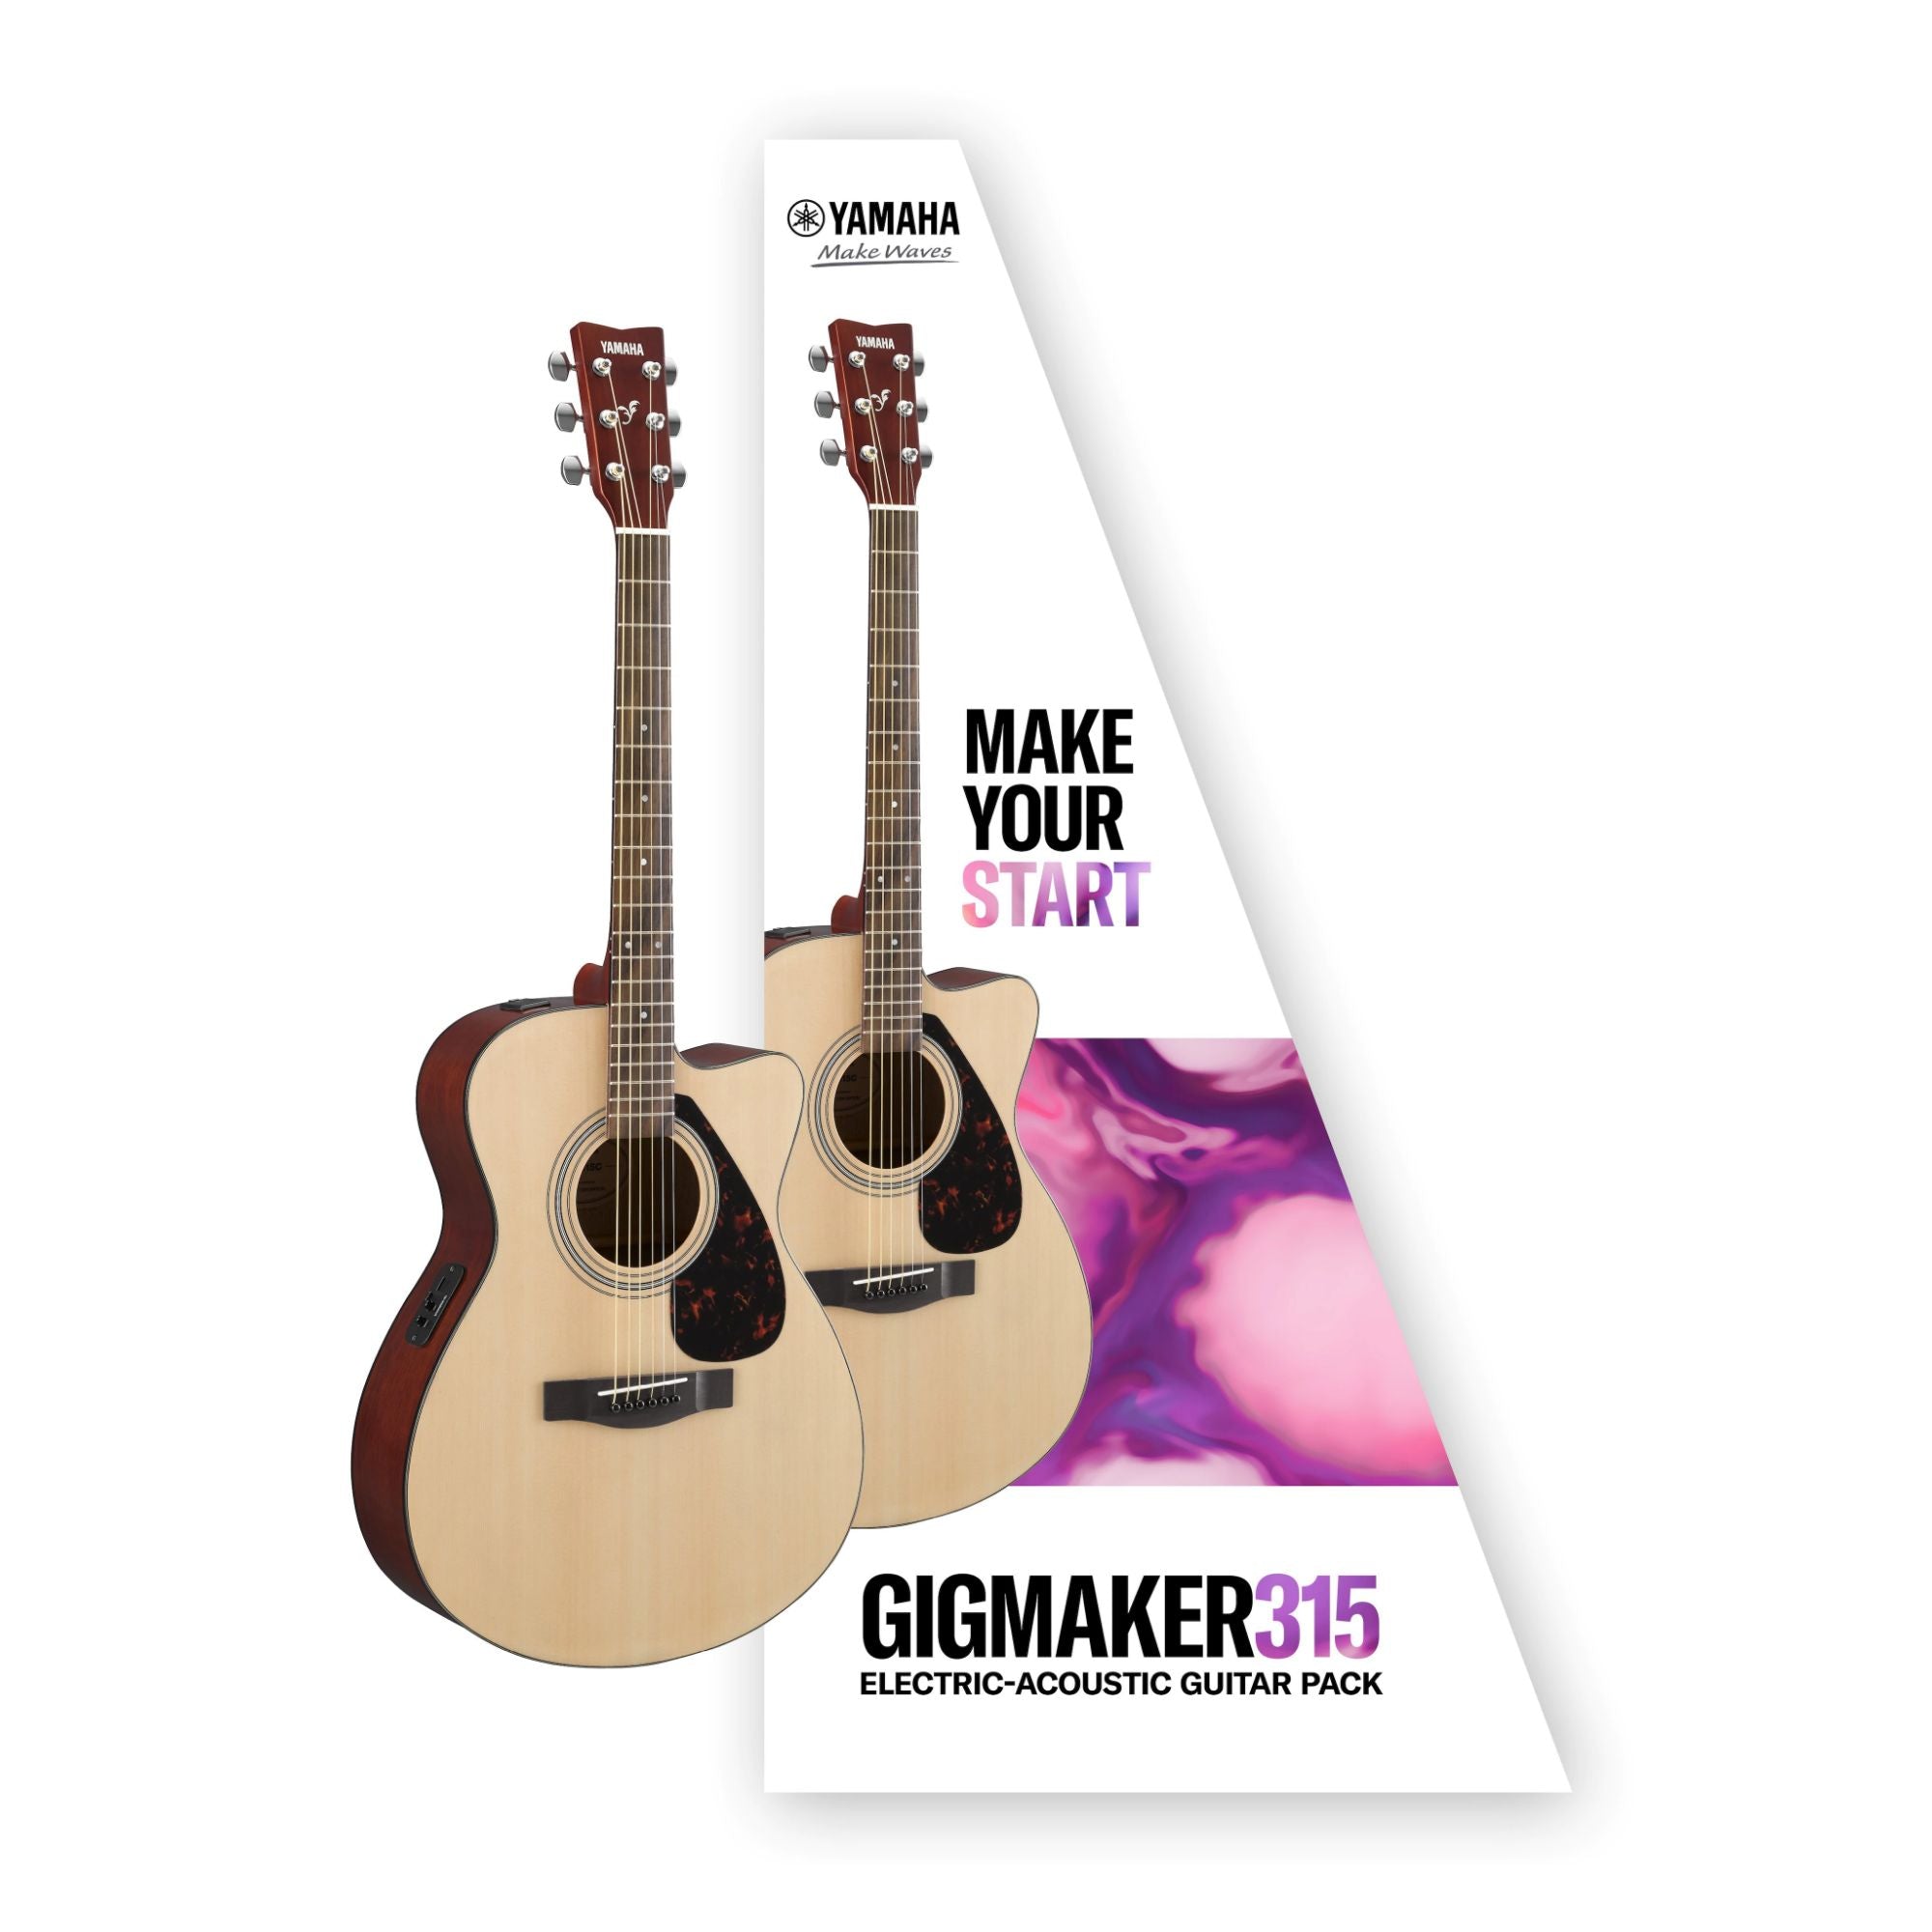 Yamaha GIGMAKER 315 Acoustic-Electric Guitar Packo